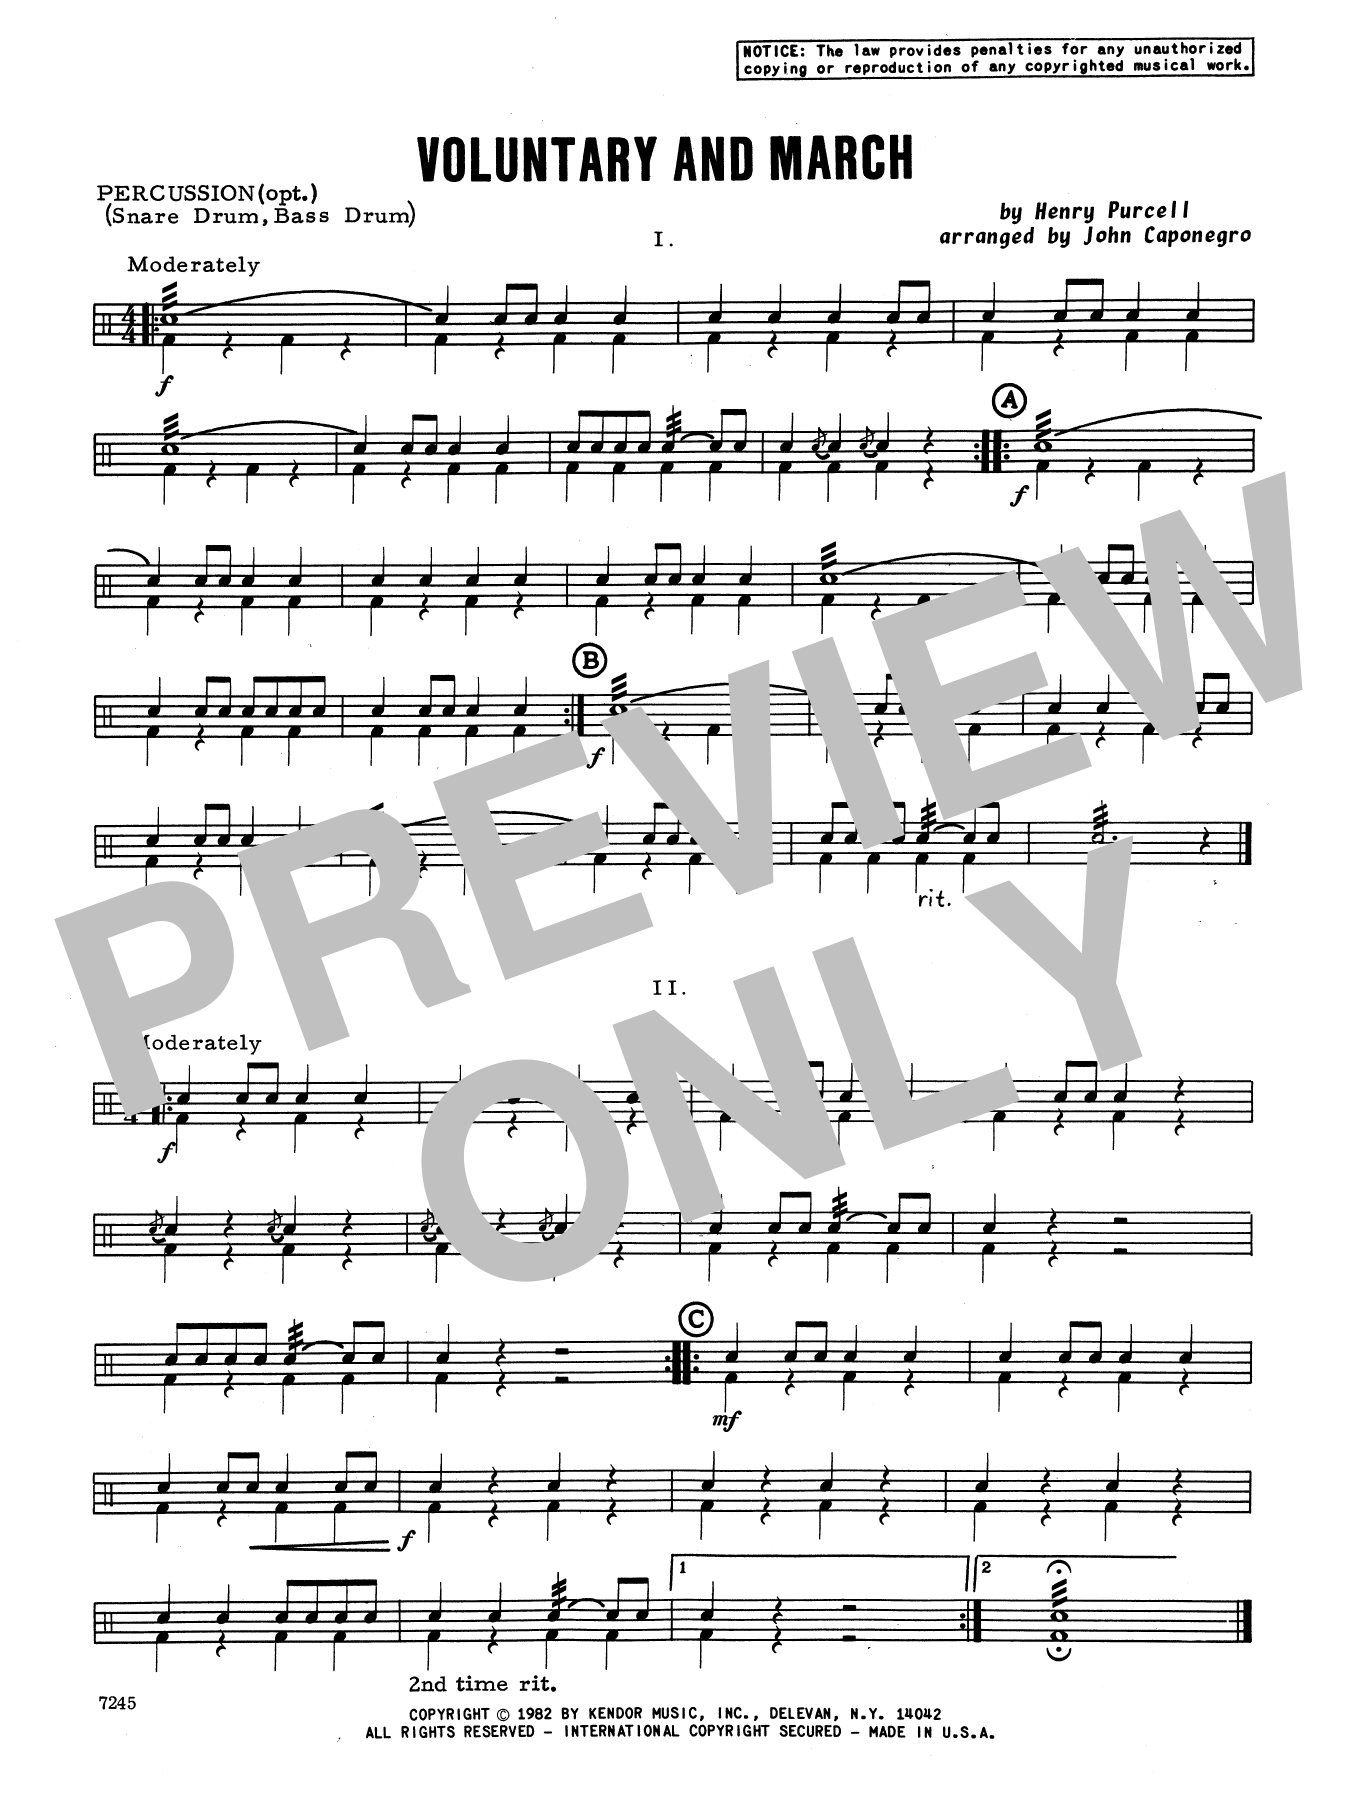 Download John Caponegro Voluntary and March - Percussion Sheet Music